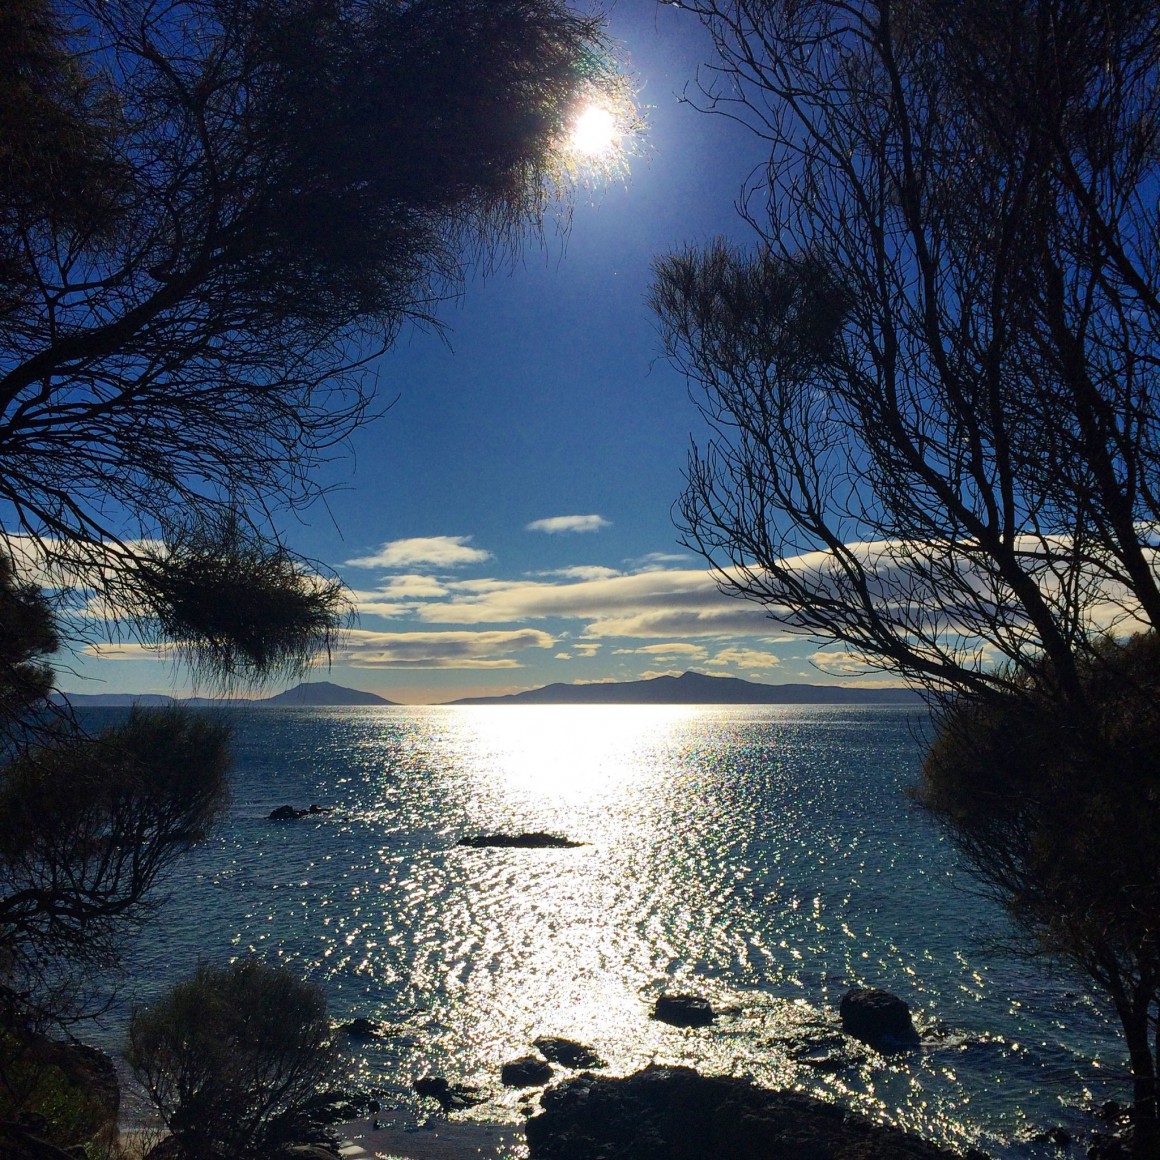 View to Freycinet National Park - Copyright